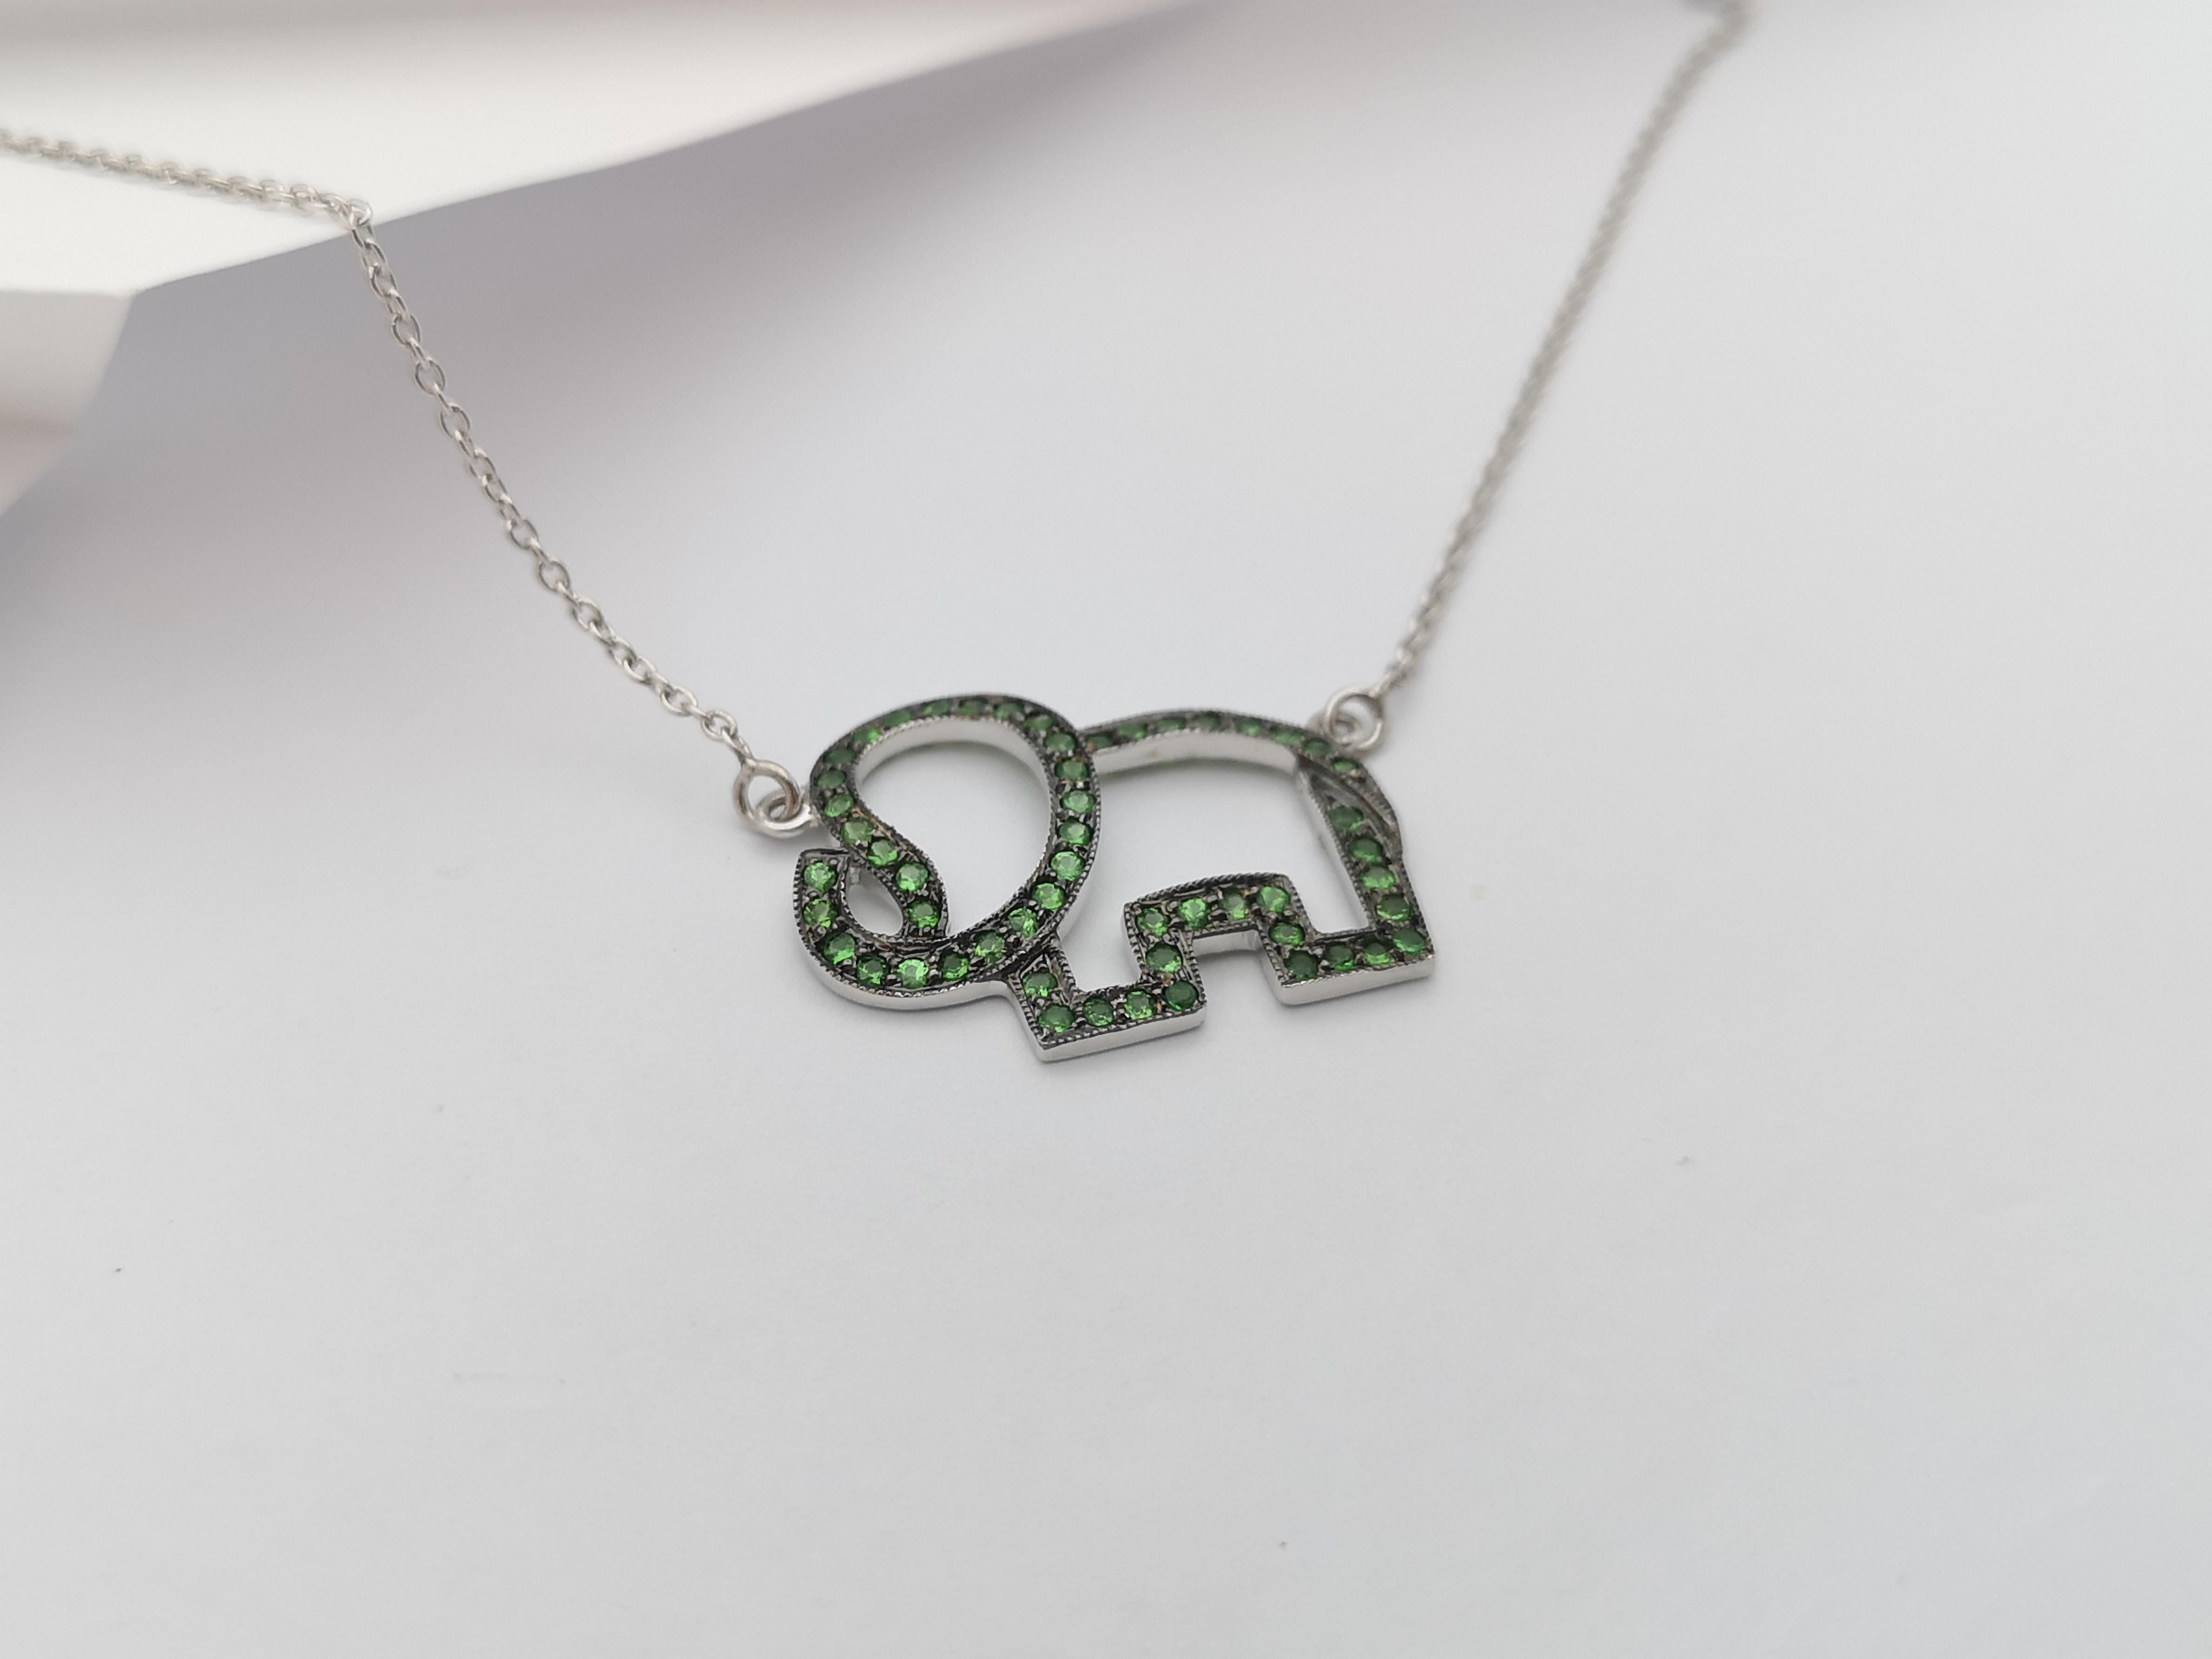 Tsavorite Necklace set in Silver Settings

Width:  1.9 cm 
Length:  45.5 cm
Total Weight: 3.39 grams

*Please note that the silver setting is plated with rhodium to promote shine and help prevent oxidation.  However, with the nature of silver,